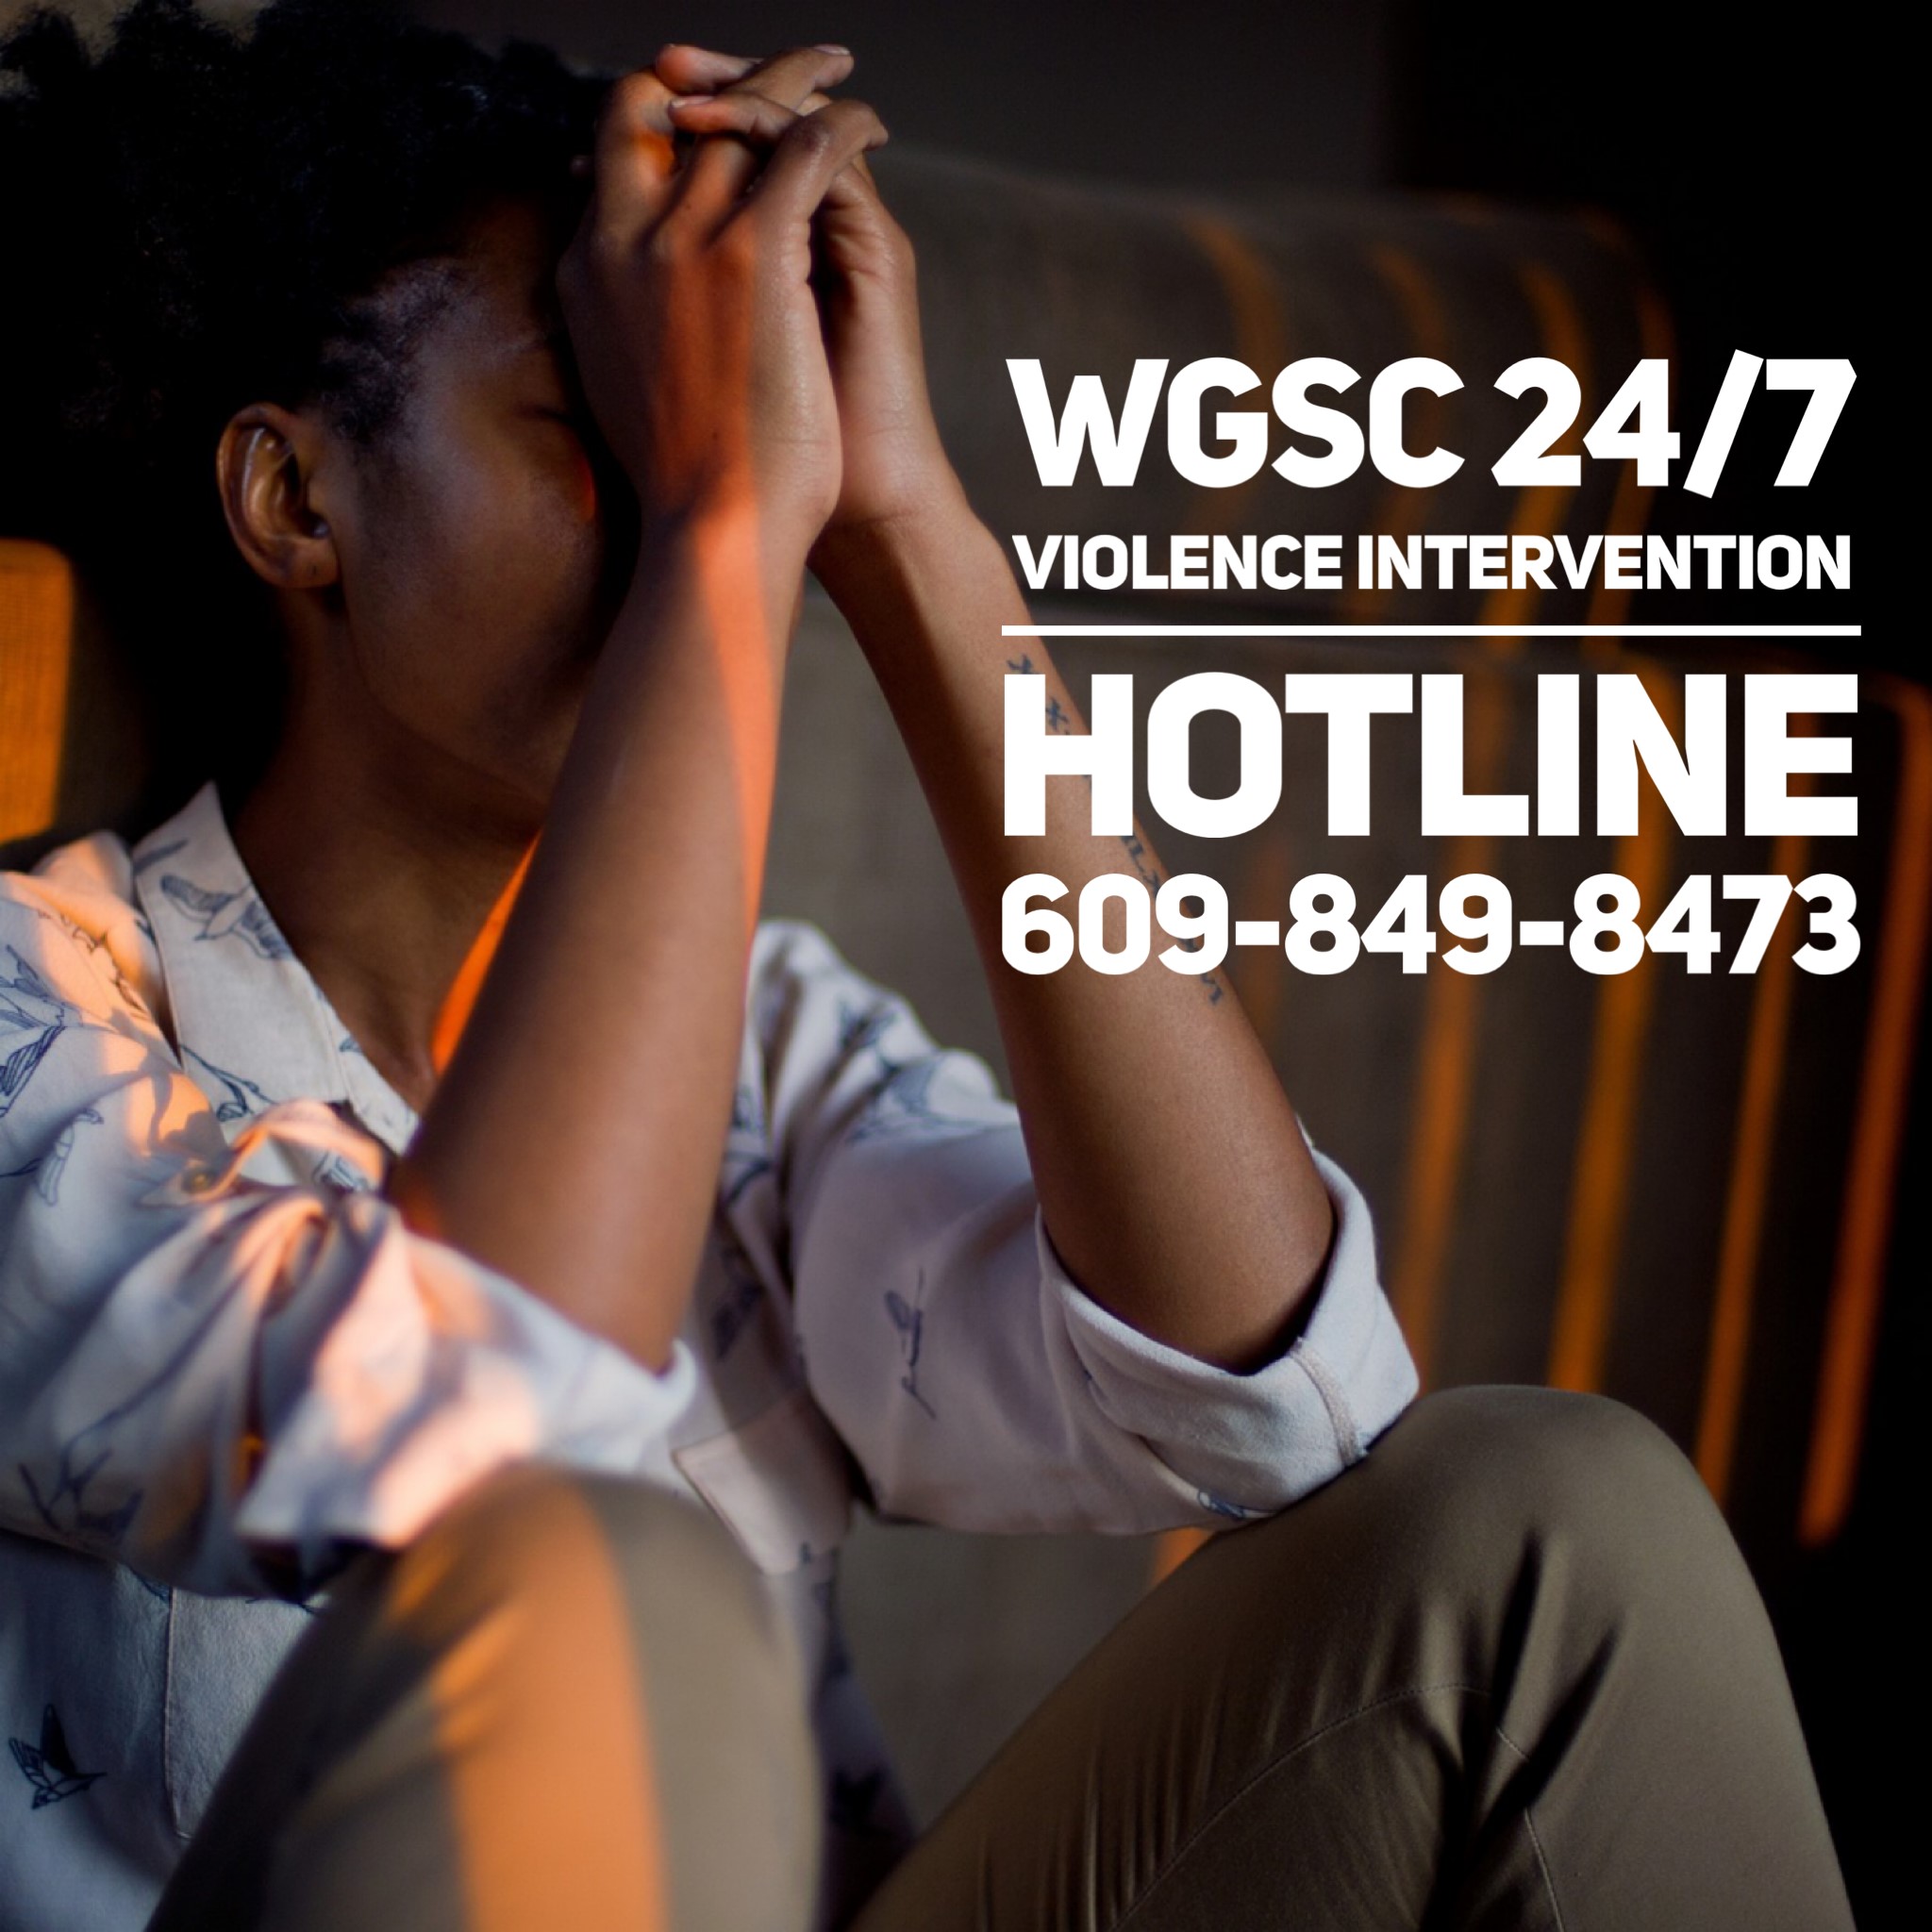 Girl with hands over face hotline info in corner reads WGSC hotline is now open 24/7/365 call 609-849-8473